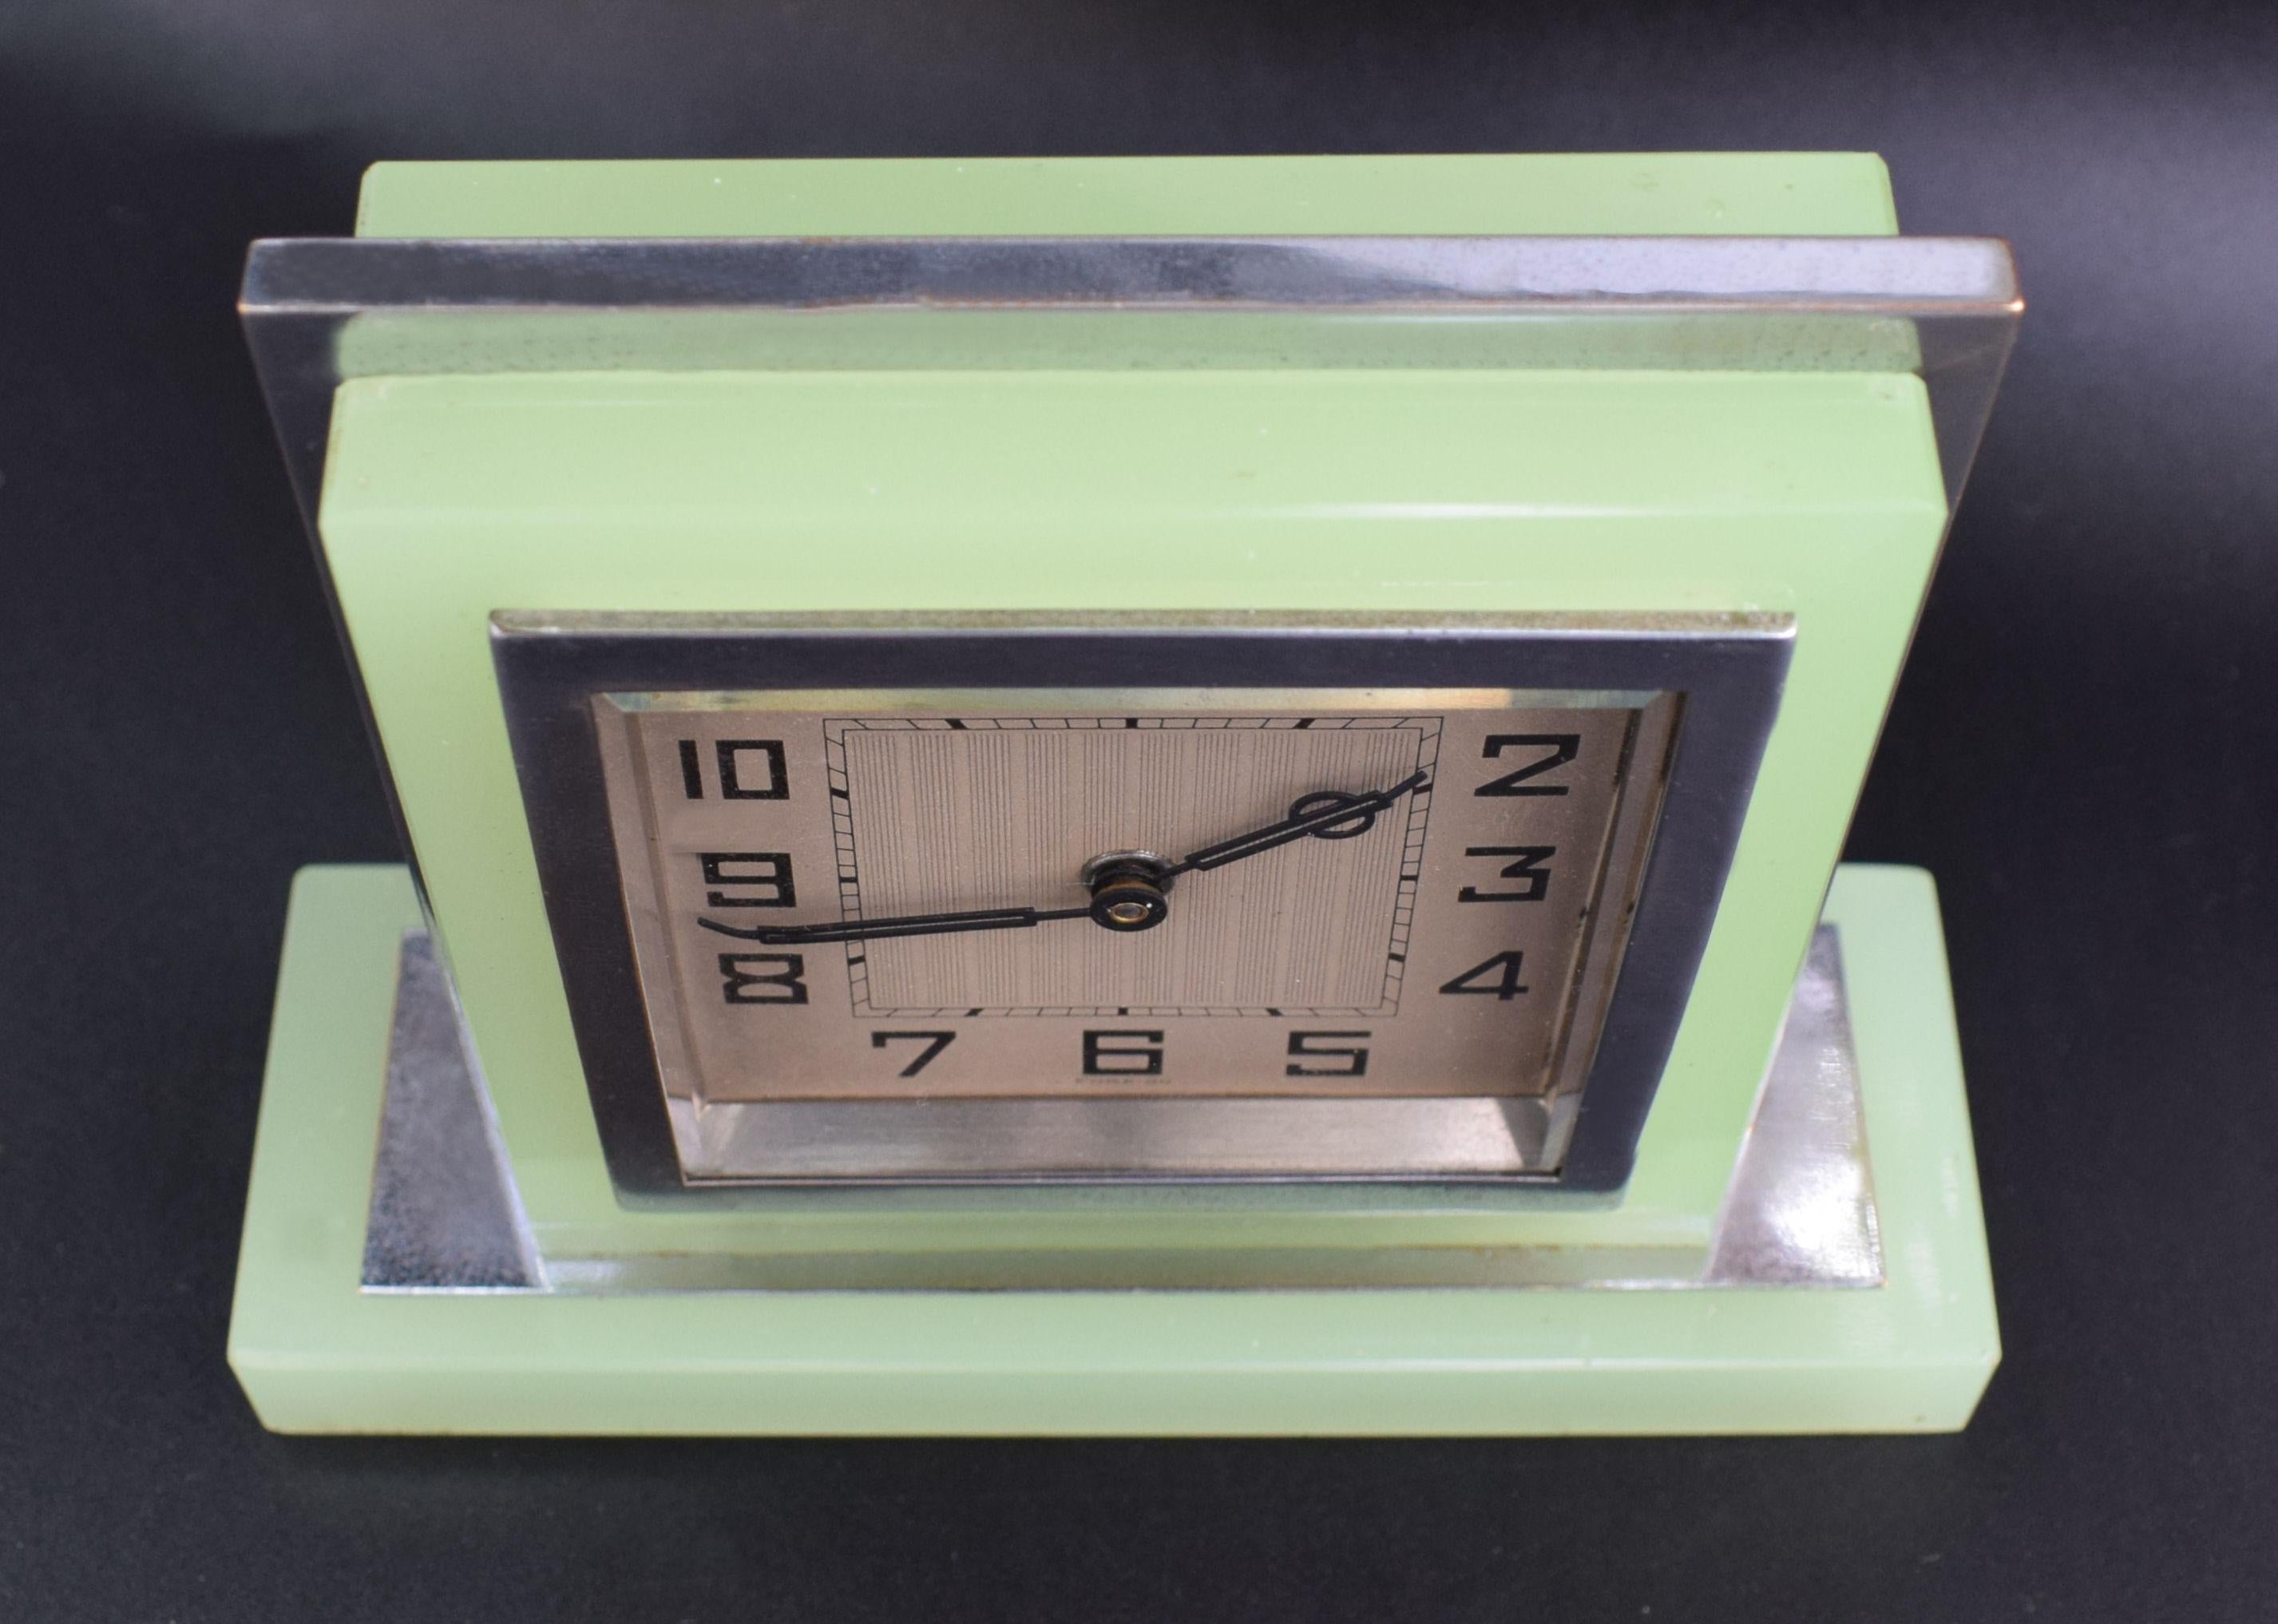 Original 1930s Art Deco opaque green glass clock with chrome accents. 30 hour clock recently serviced so is in good working order and keeps good time. 90 odd years old this clock will live another life time. No damage to report everything is in very